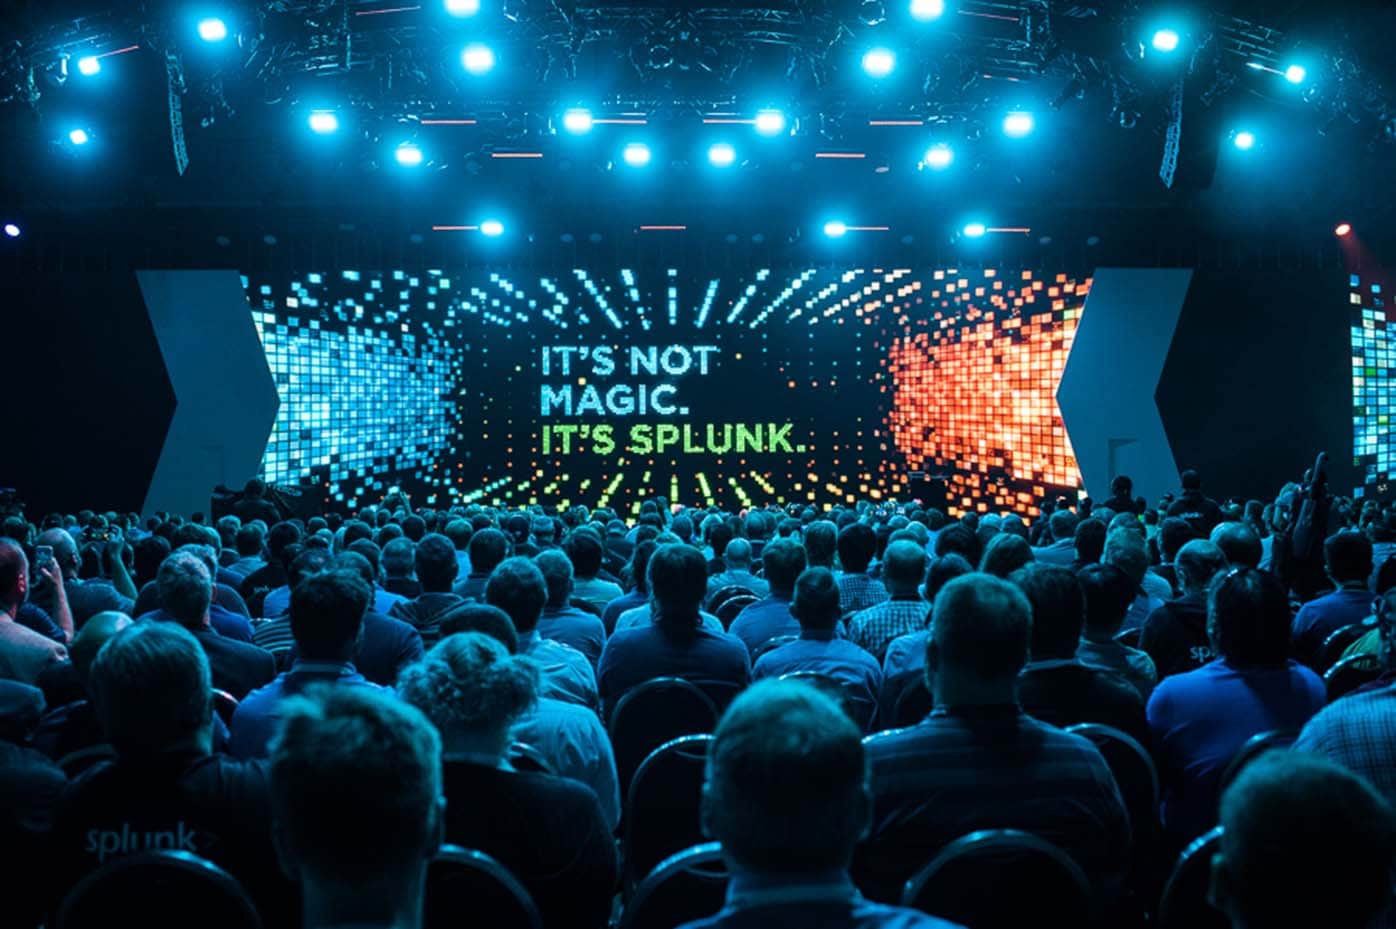 Splunk conf 2017 audience view